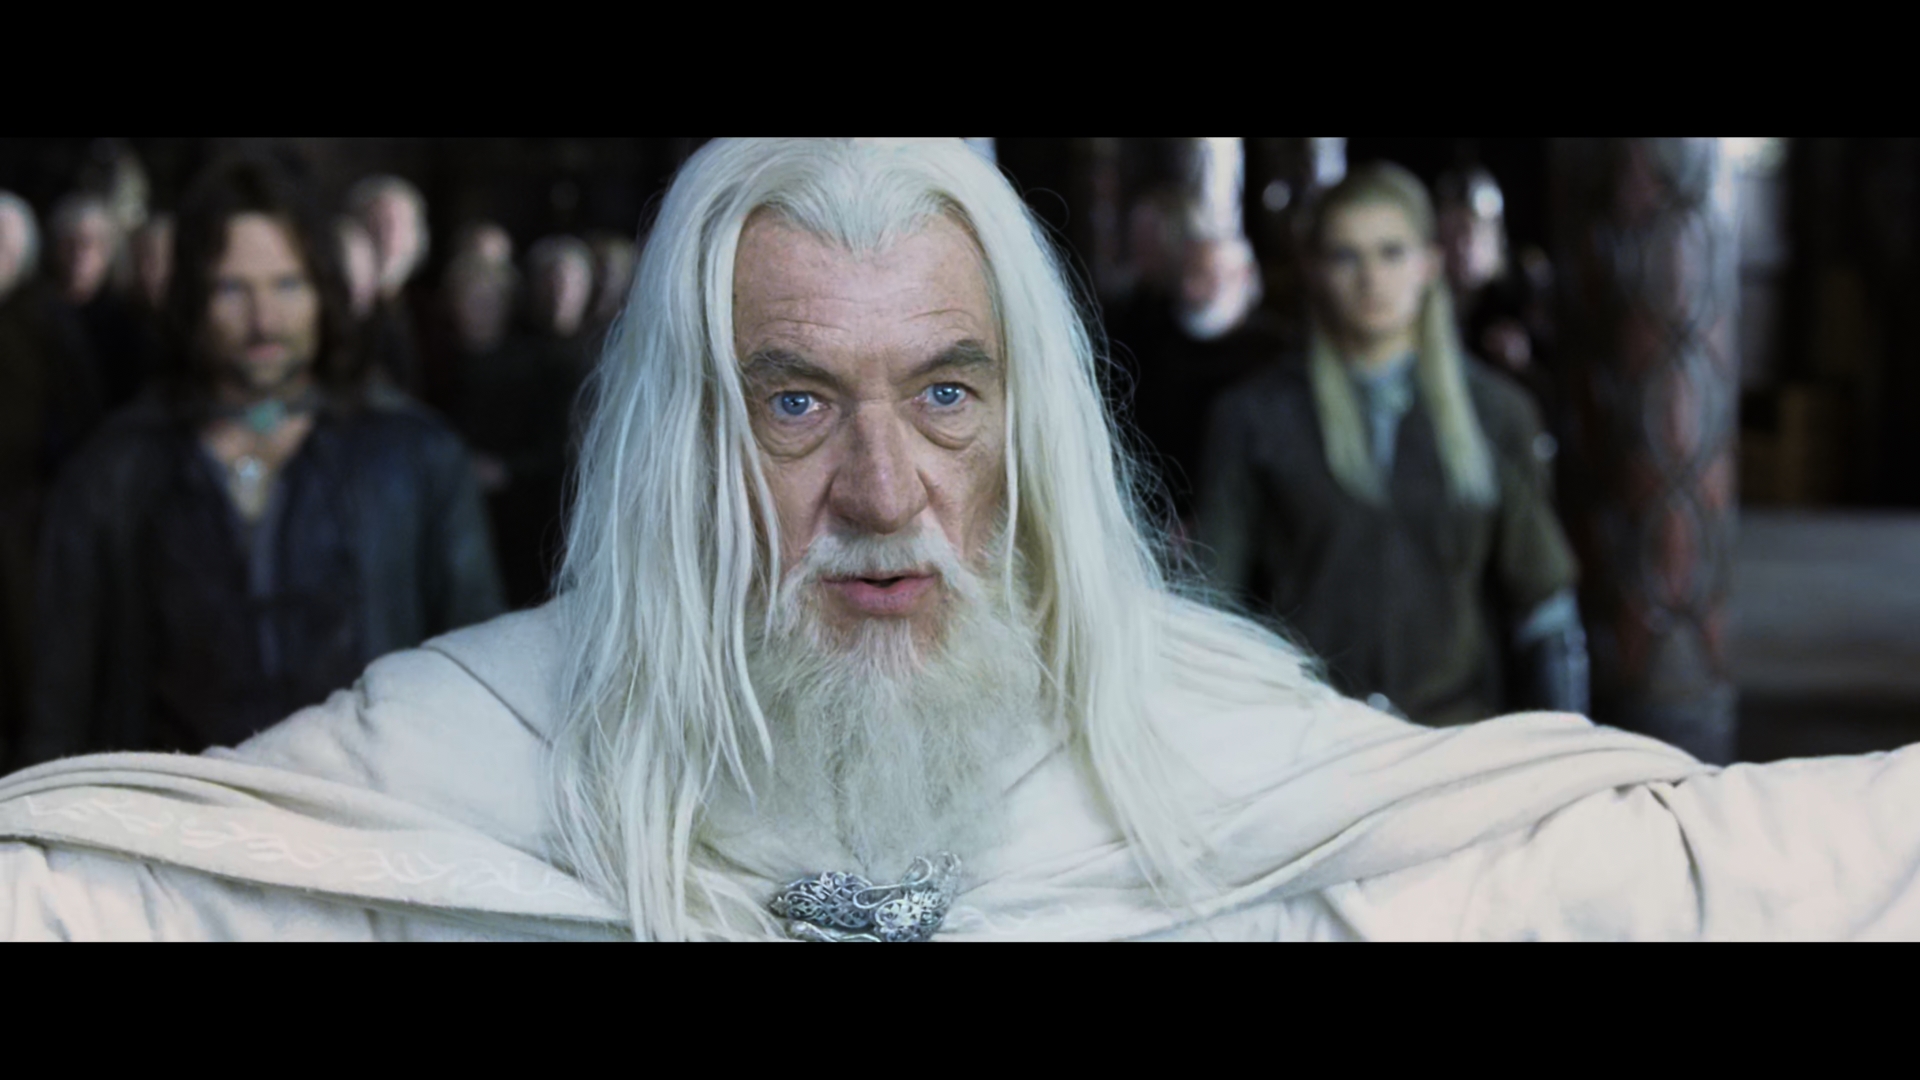 kickass torrent lord of the rings extended trilogy